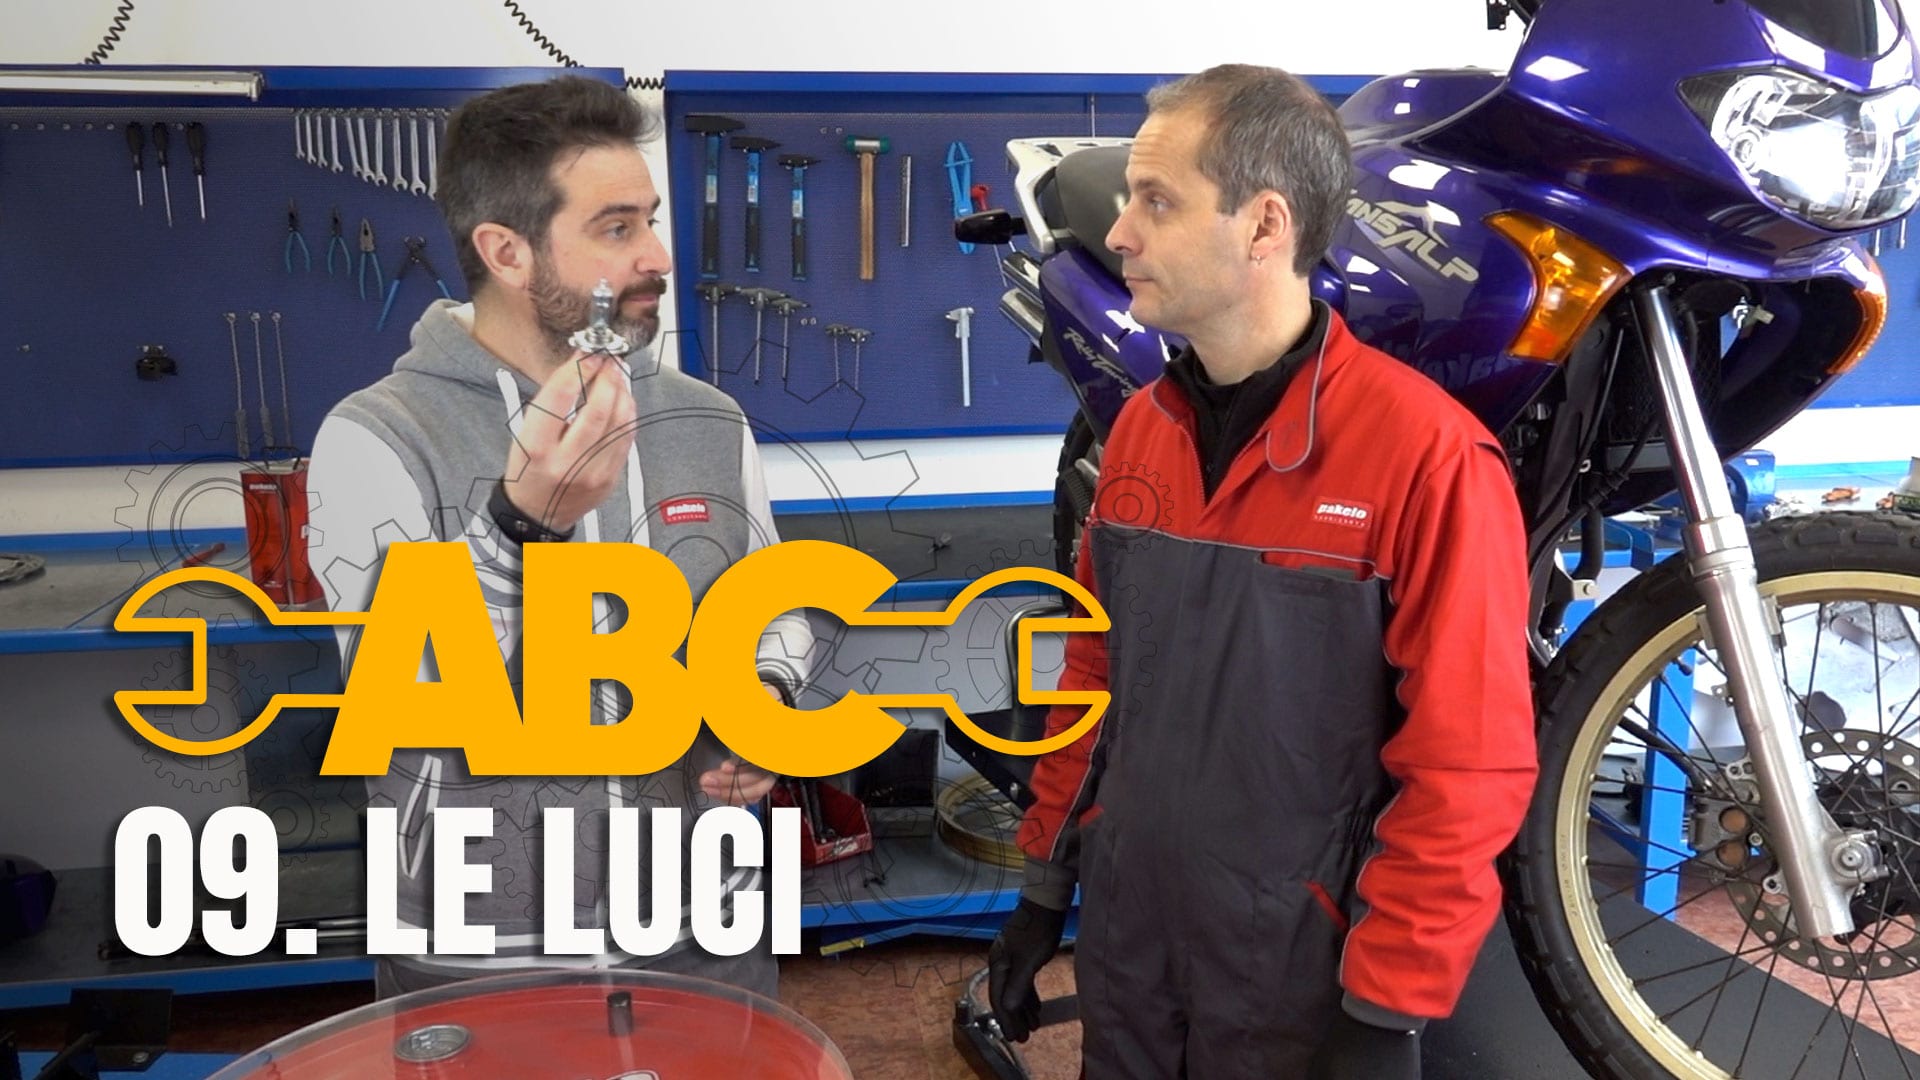 abc maintenance motorcycle episode 09 the lights